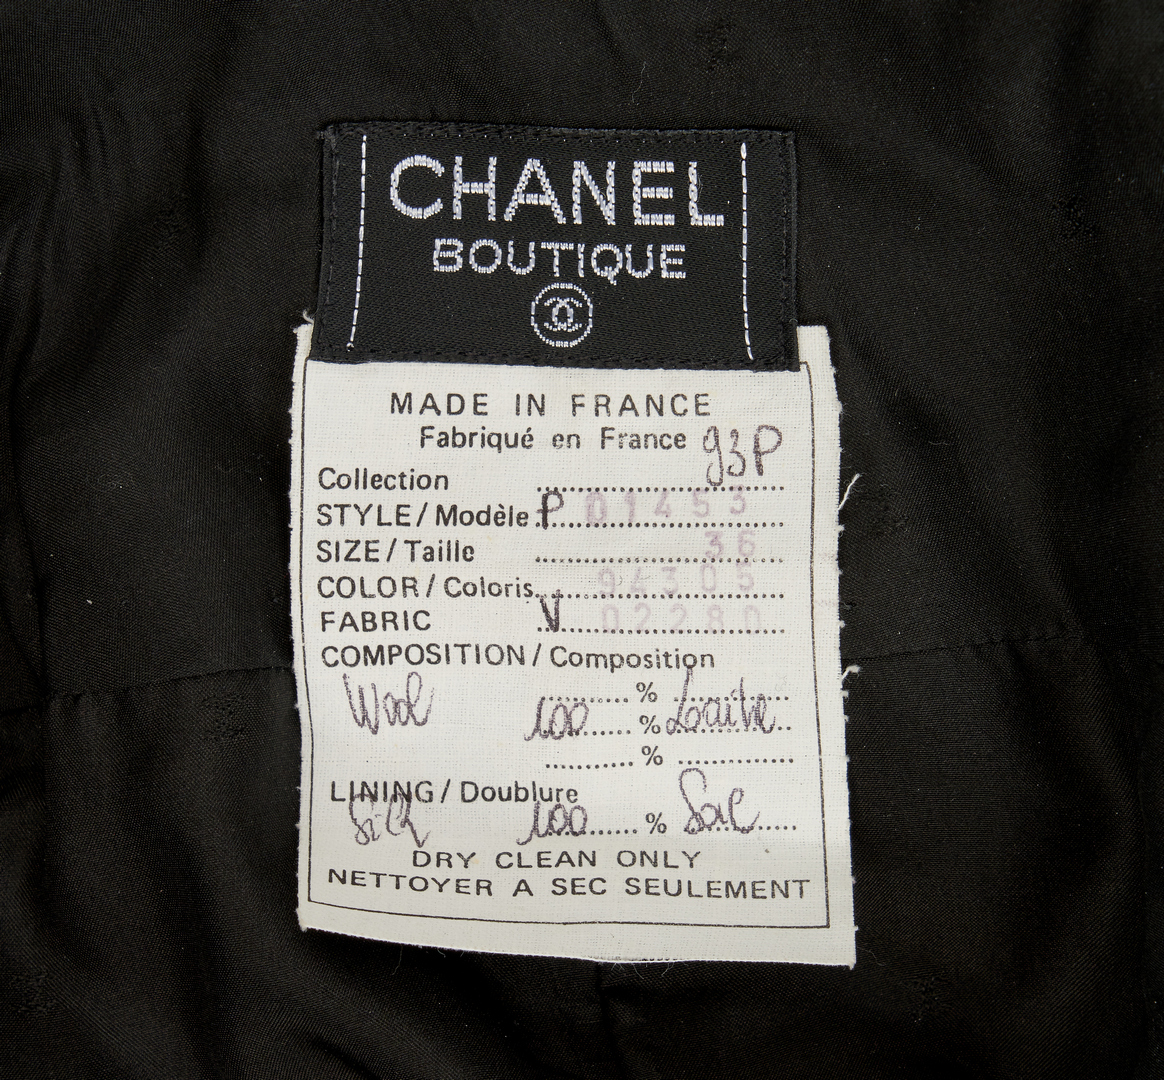 Lot 711: 2 Chanel Jackets, 1 Chanel Skirt, & 1 Picasso Scarf, 4 items